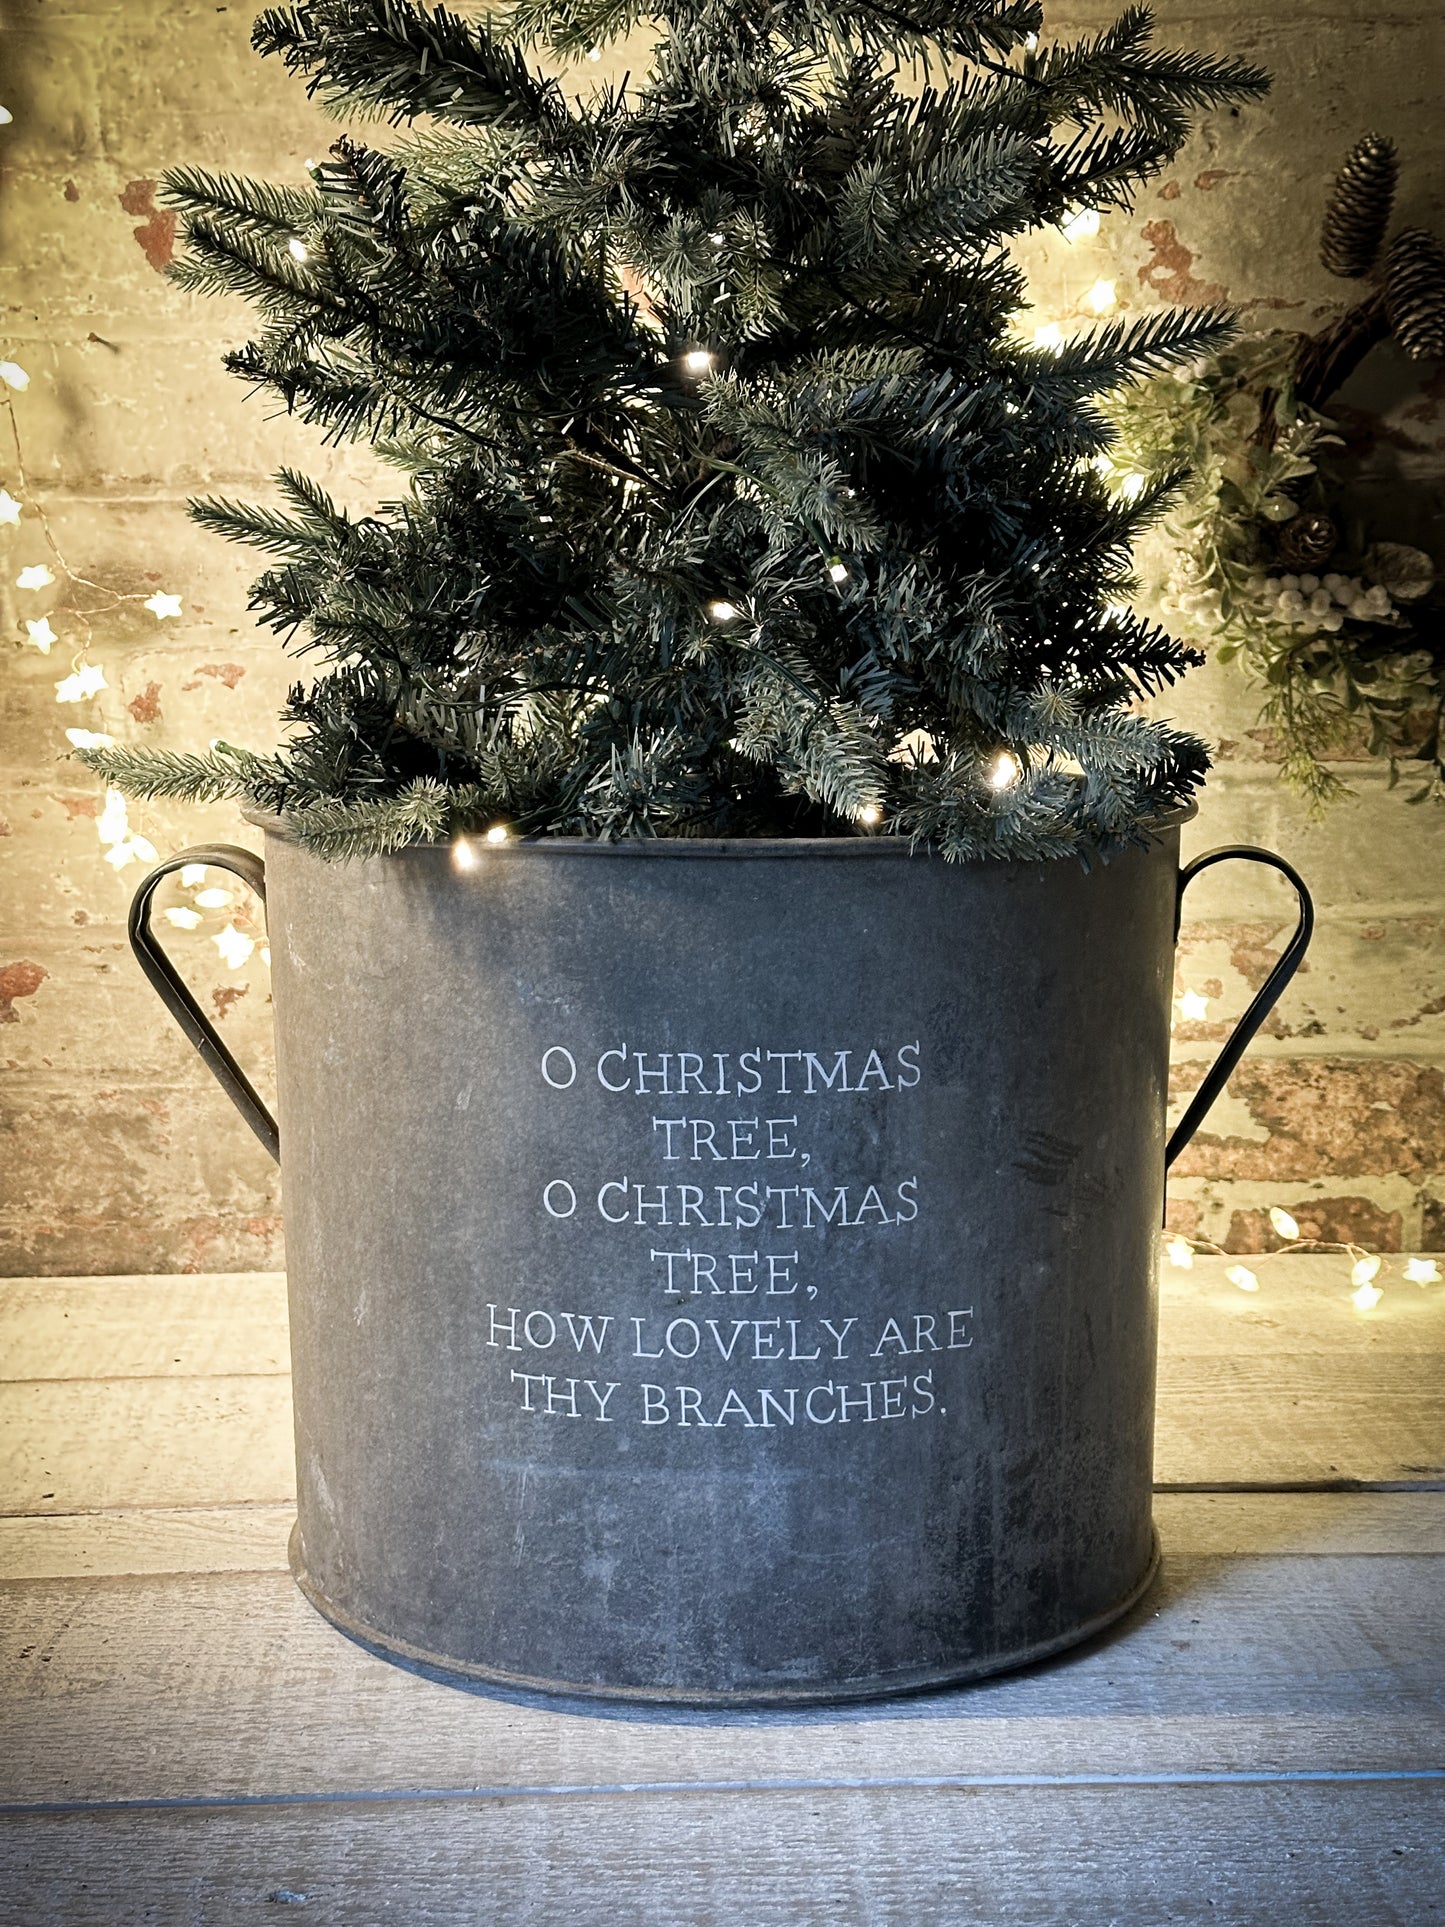 A beautiful heirloom vintage galvanised tub hand painted using traditional sign writer’s techniques and materials.